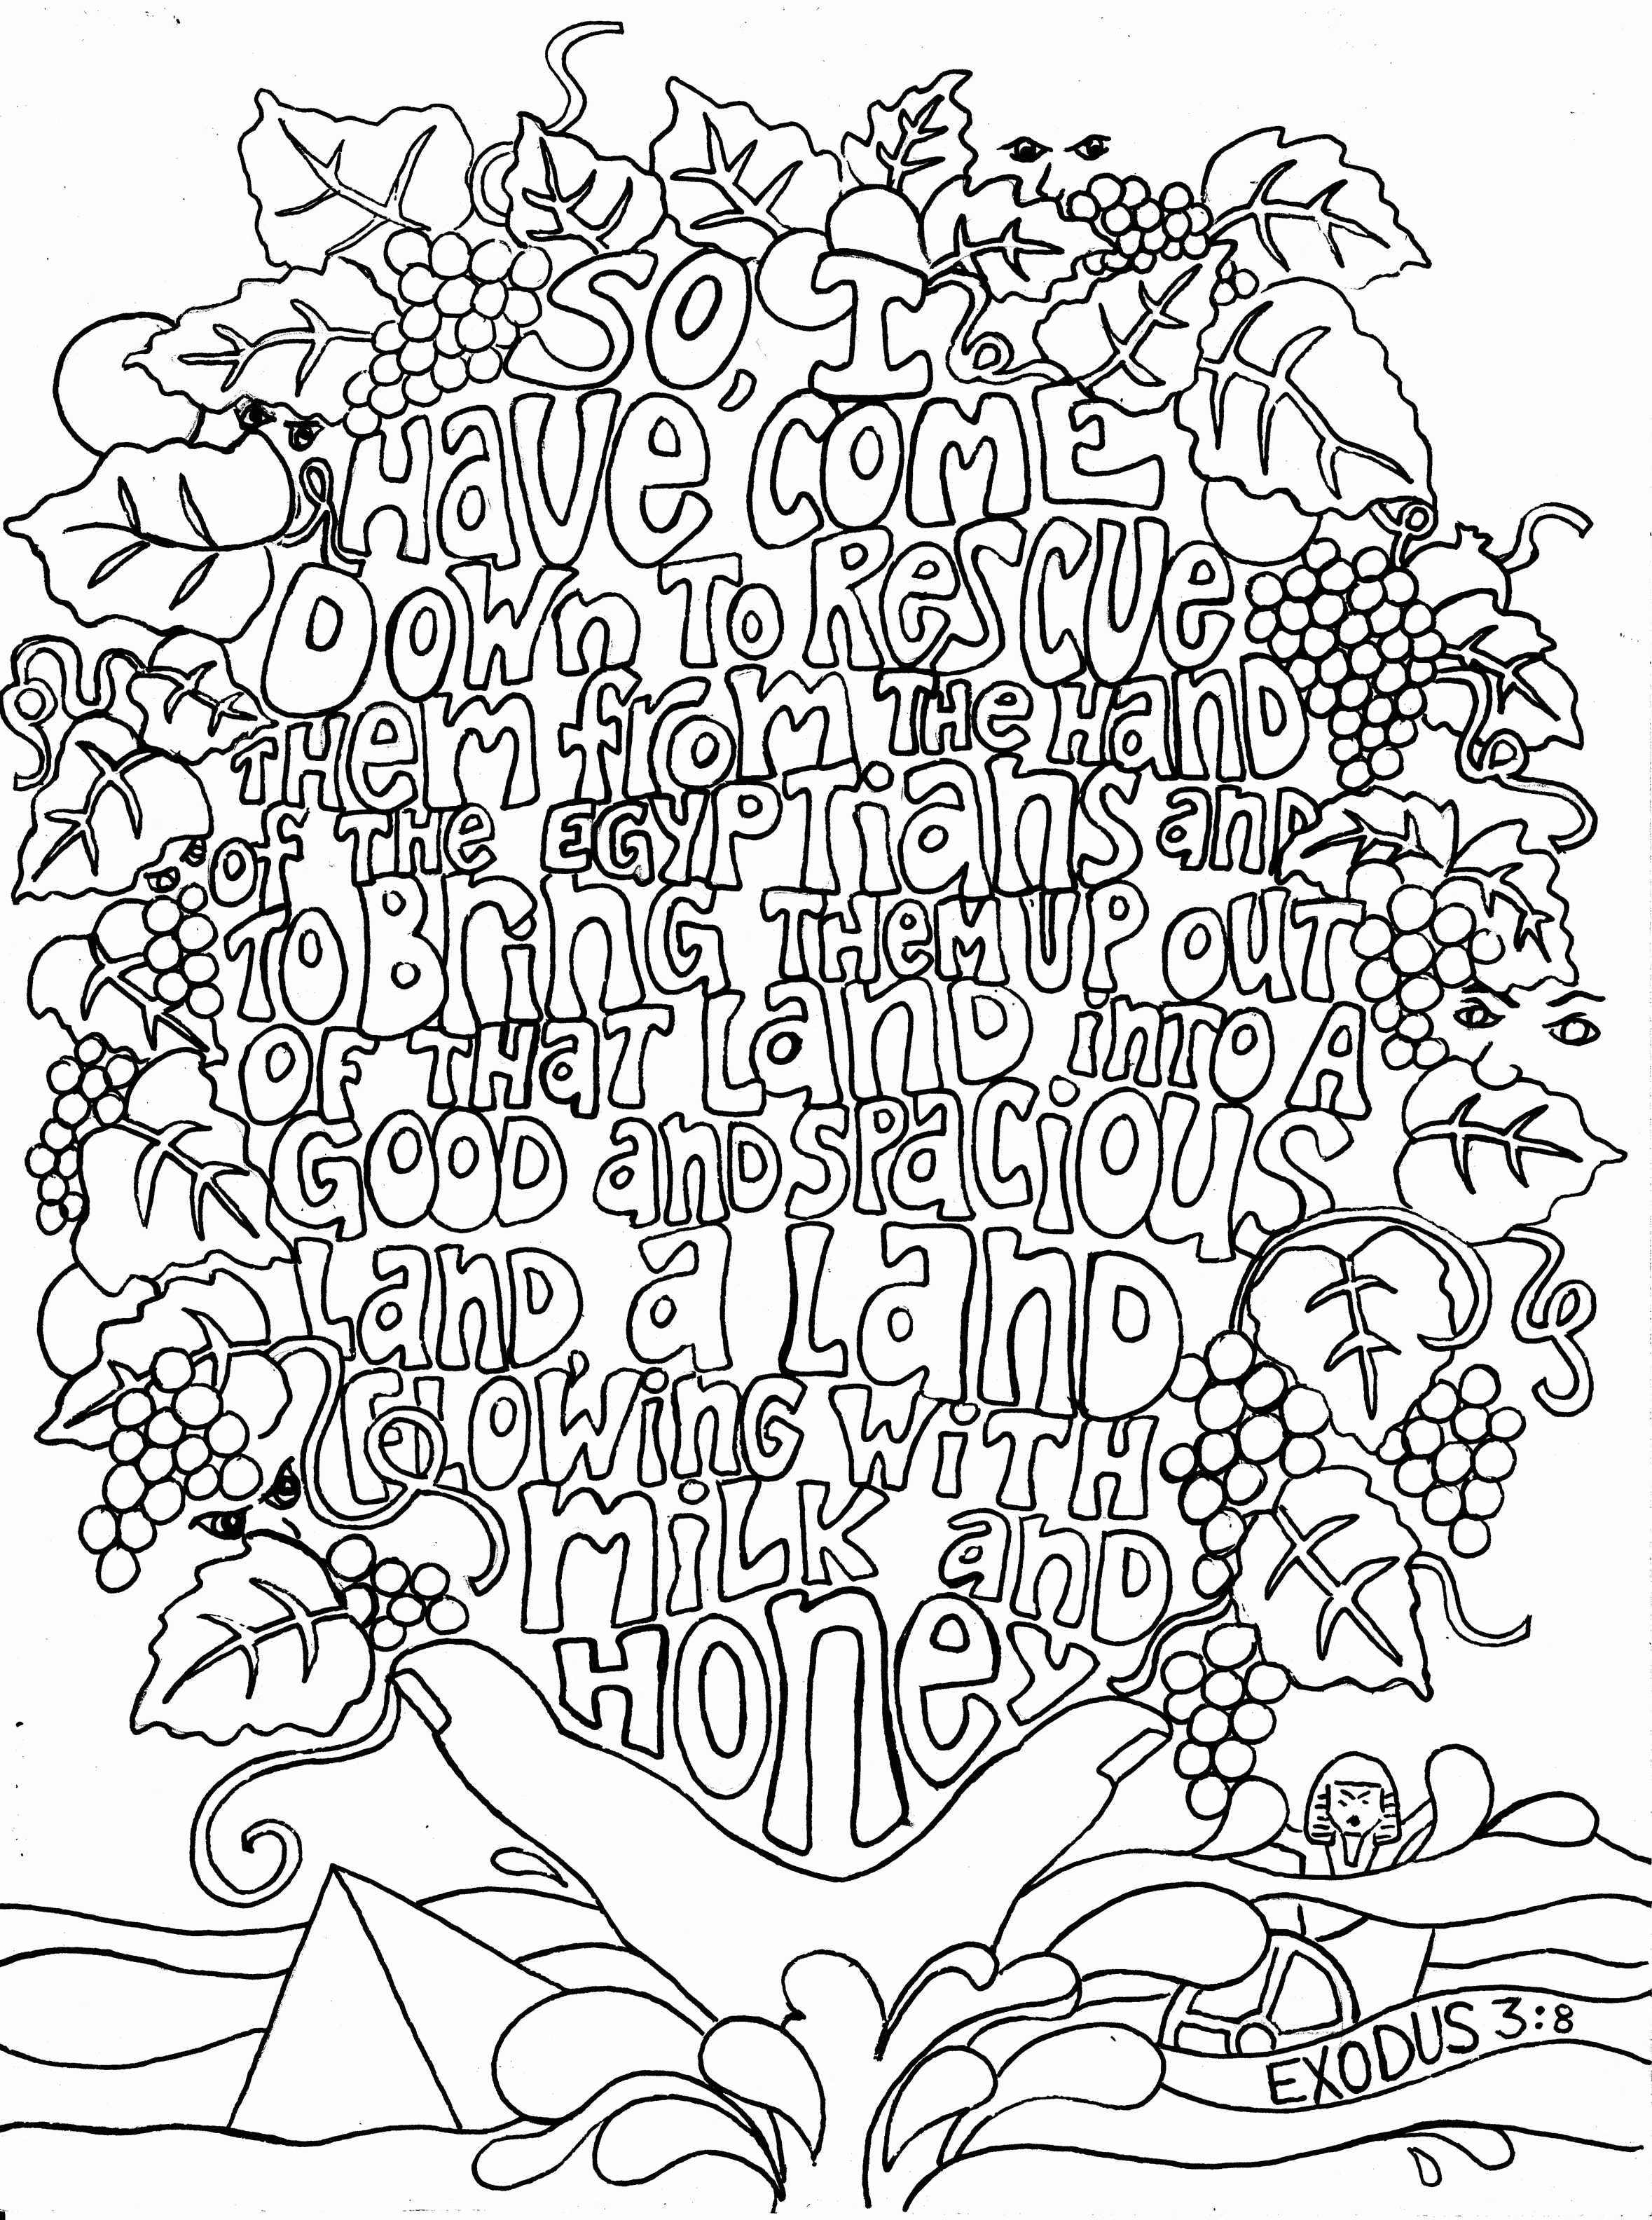 26-new-stock-adult-coloring-pages-bible-quote-bible-verse-adult-coloring-page-psalm-113-3-by